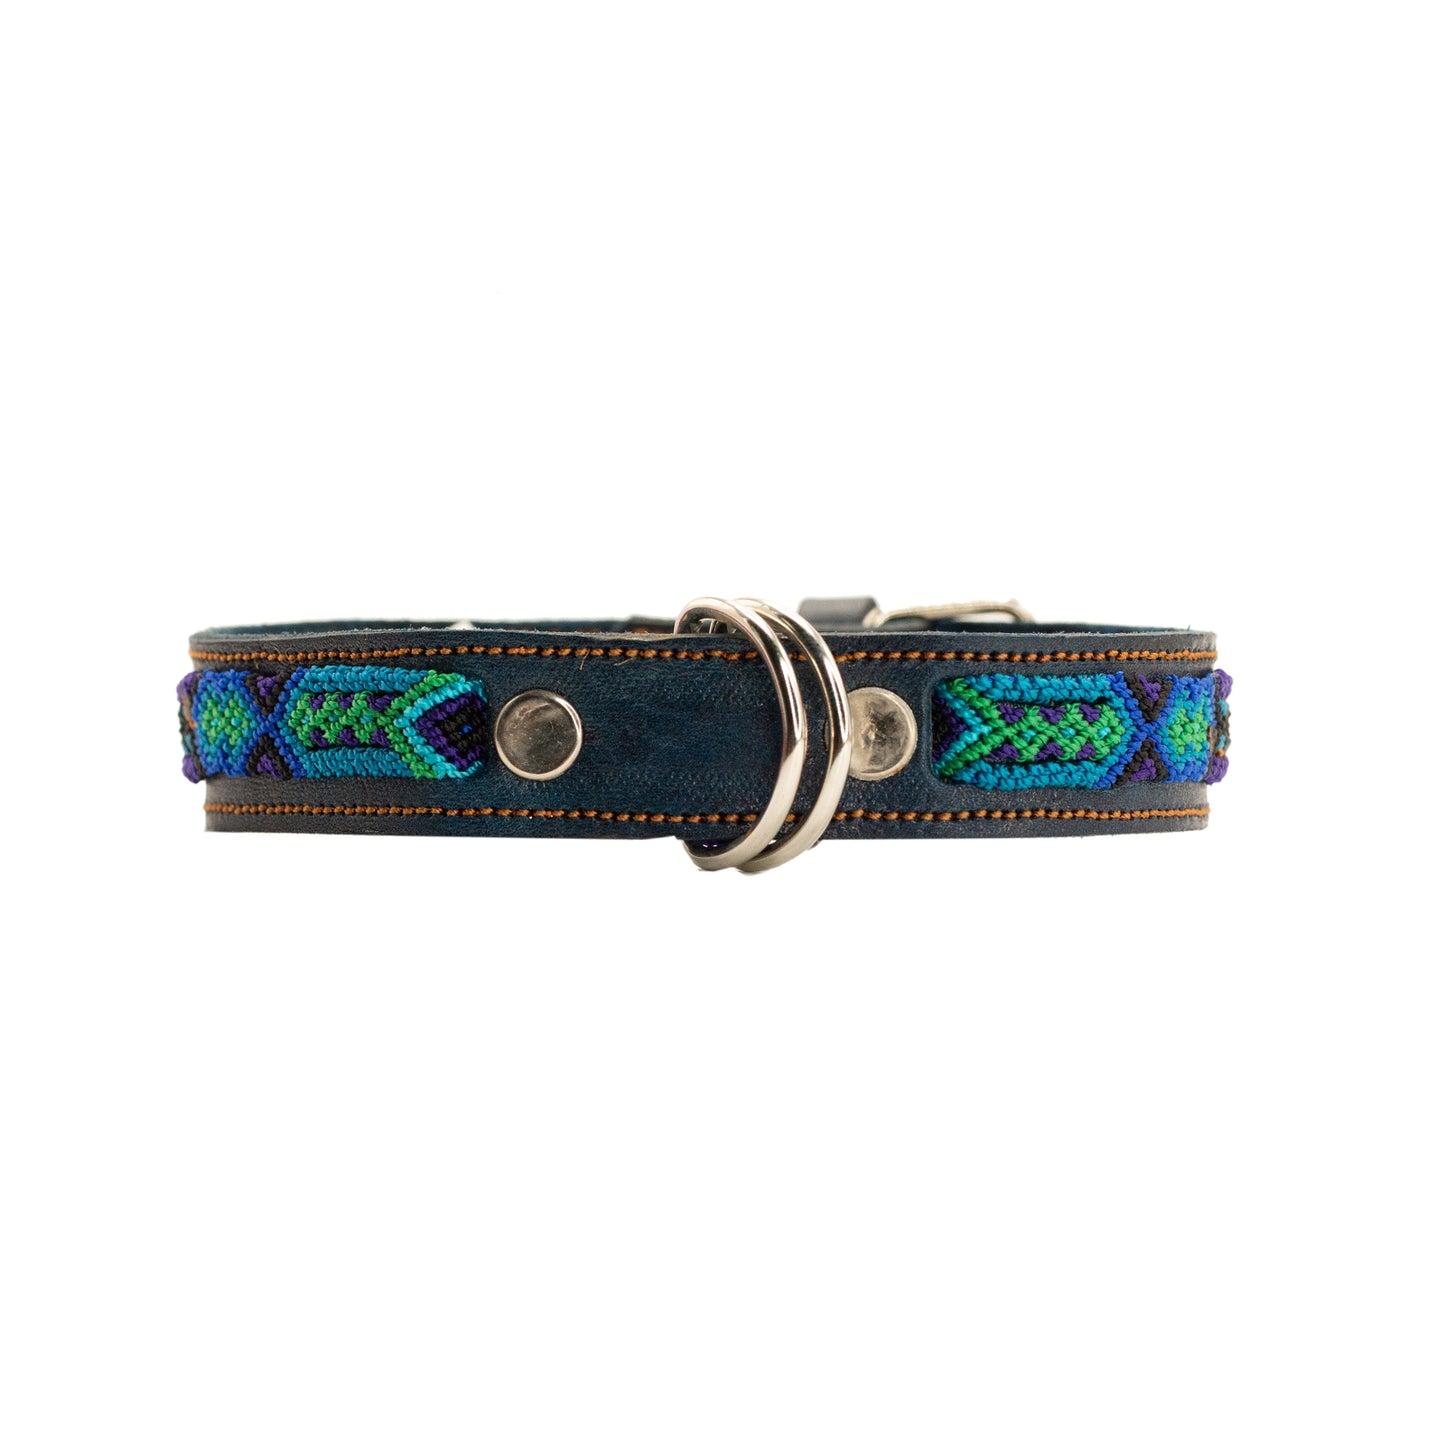 Artisan-crafted pet accessory inspired by Mexican cultural heritage